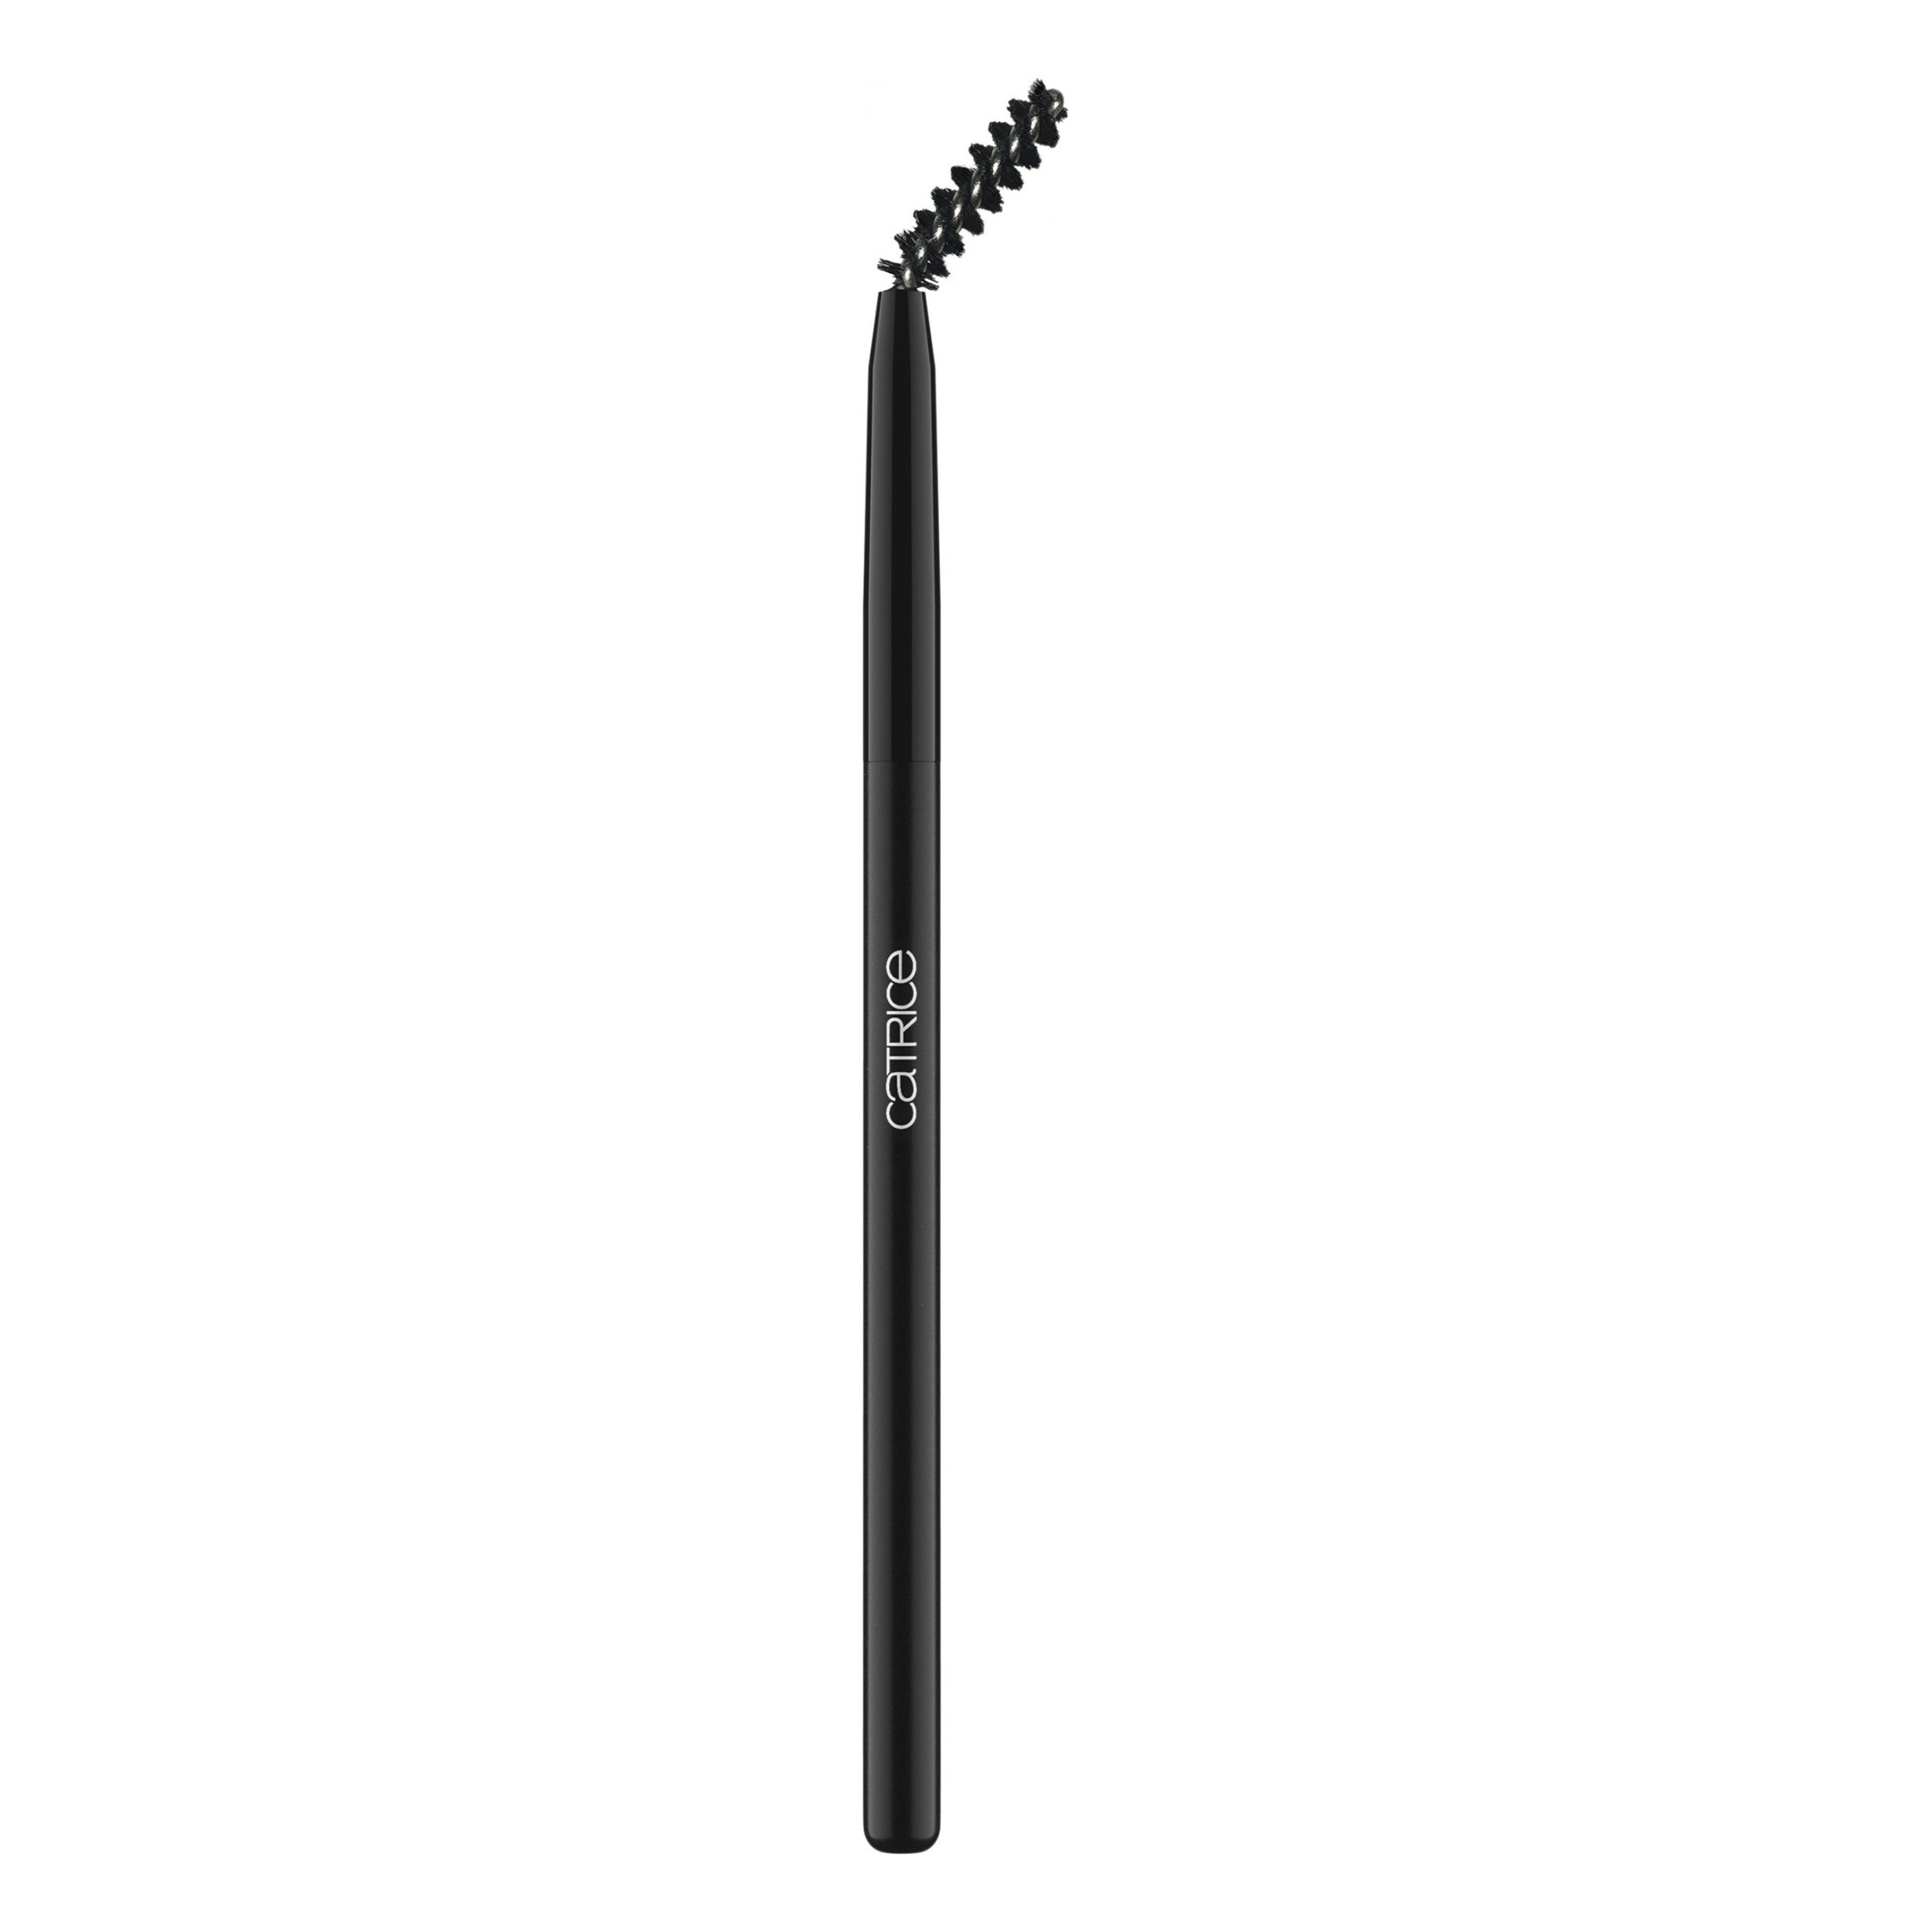 Pinceau Sourcils - Lift Up Brow Styling Brush